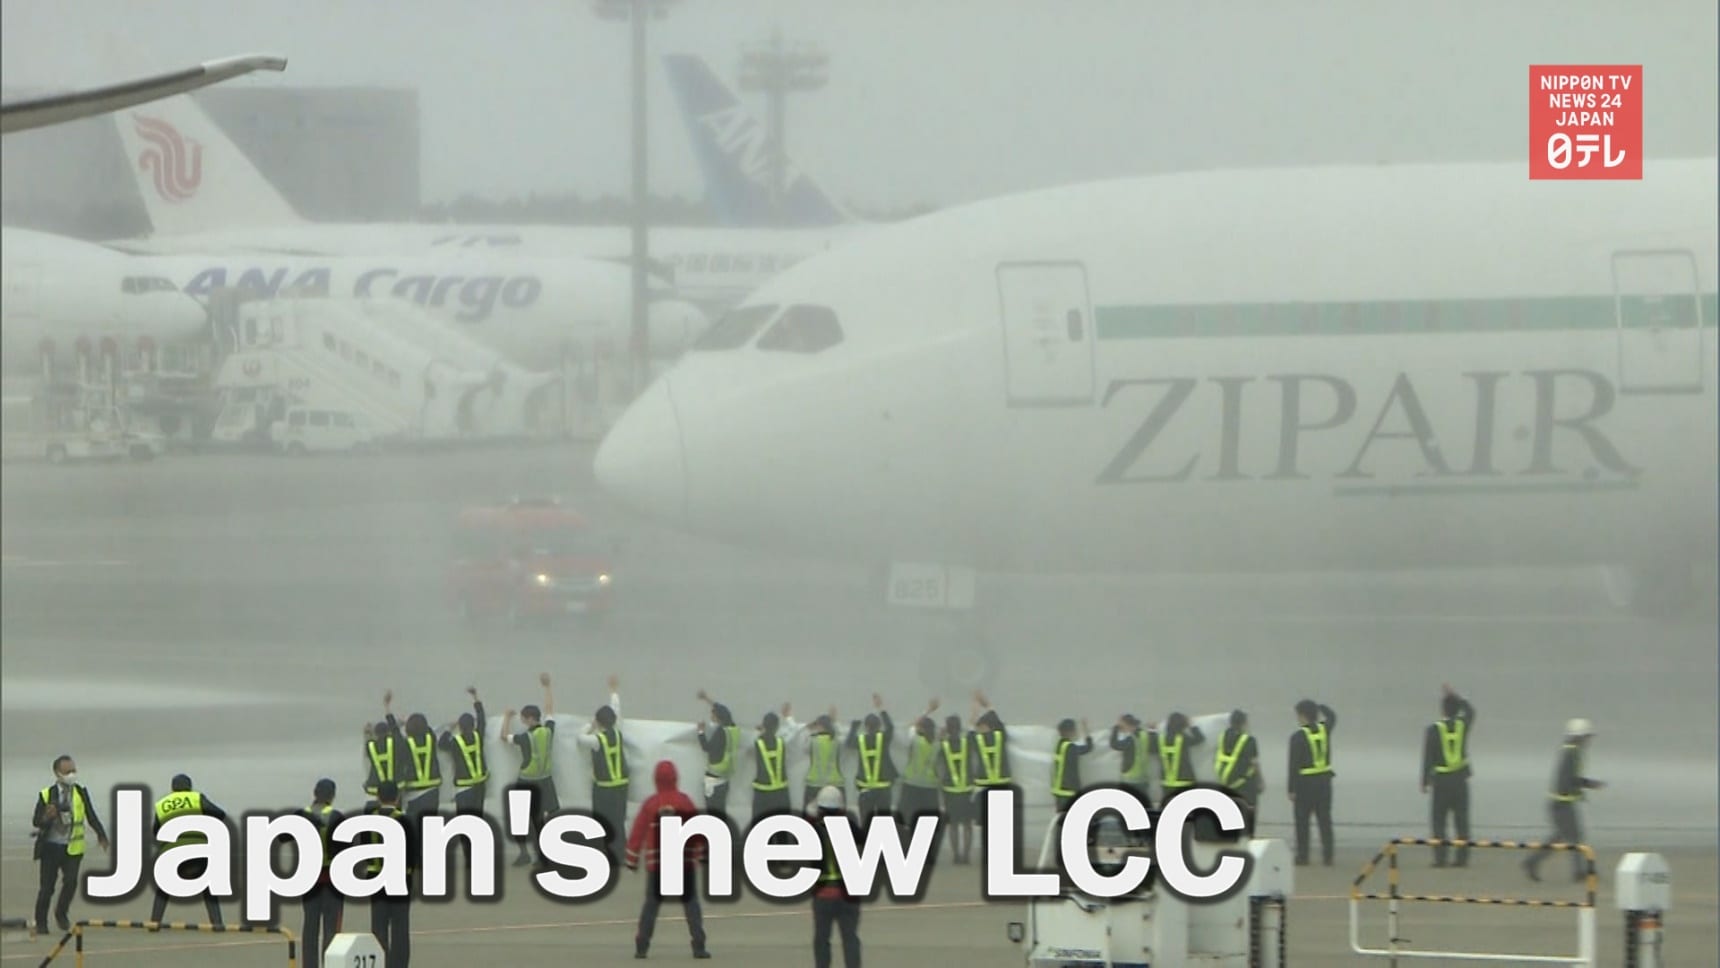 Introducing Zipair, Japan’s Newest LCC Airline